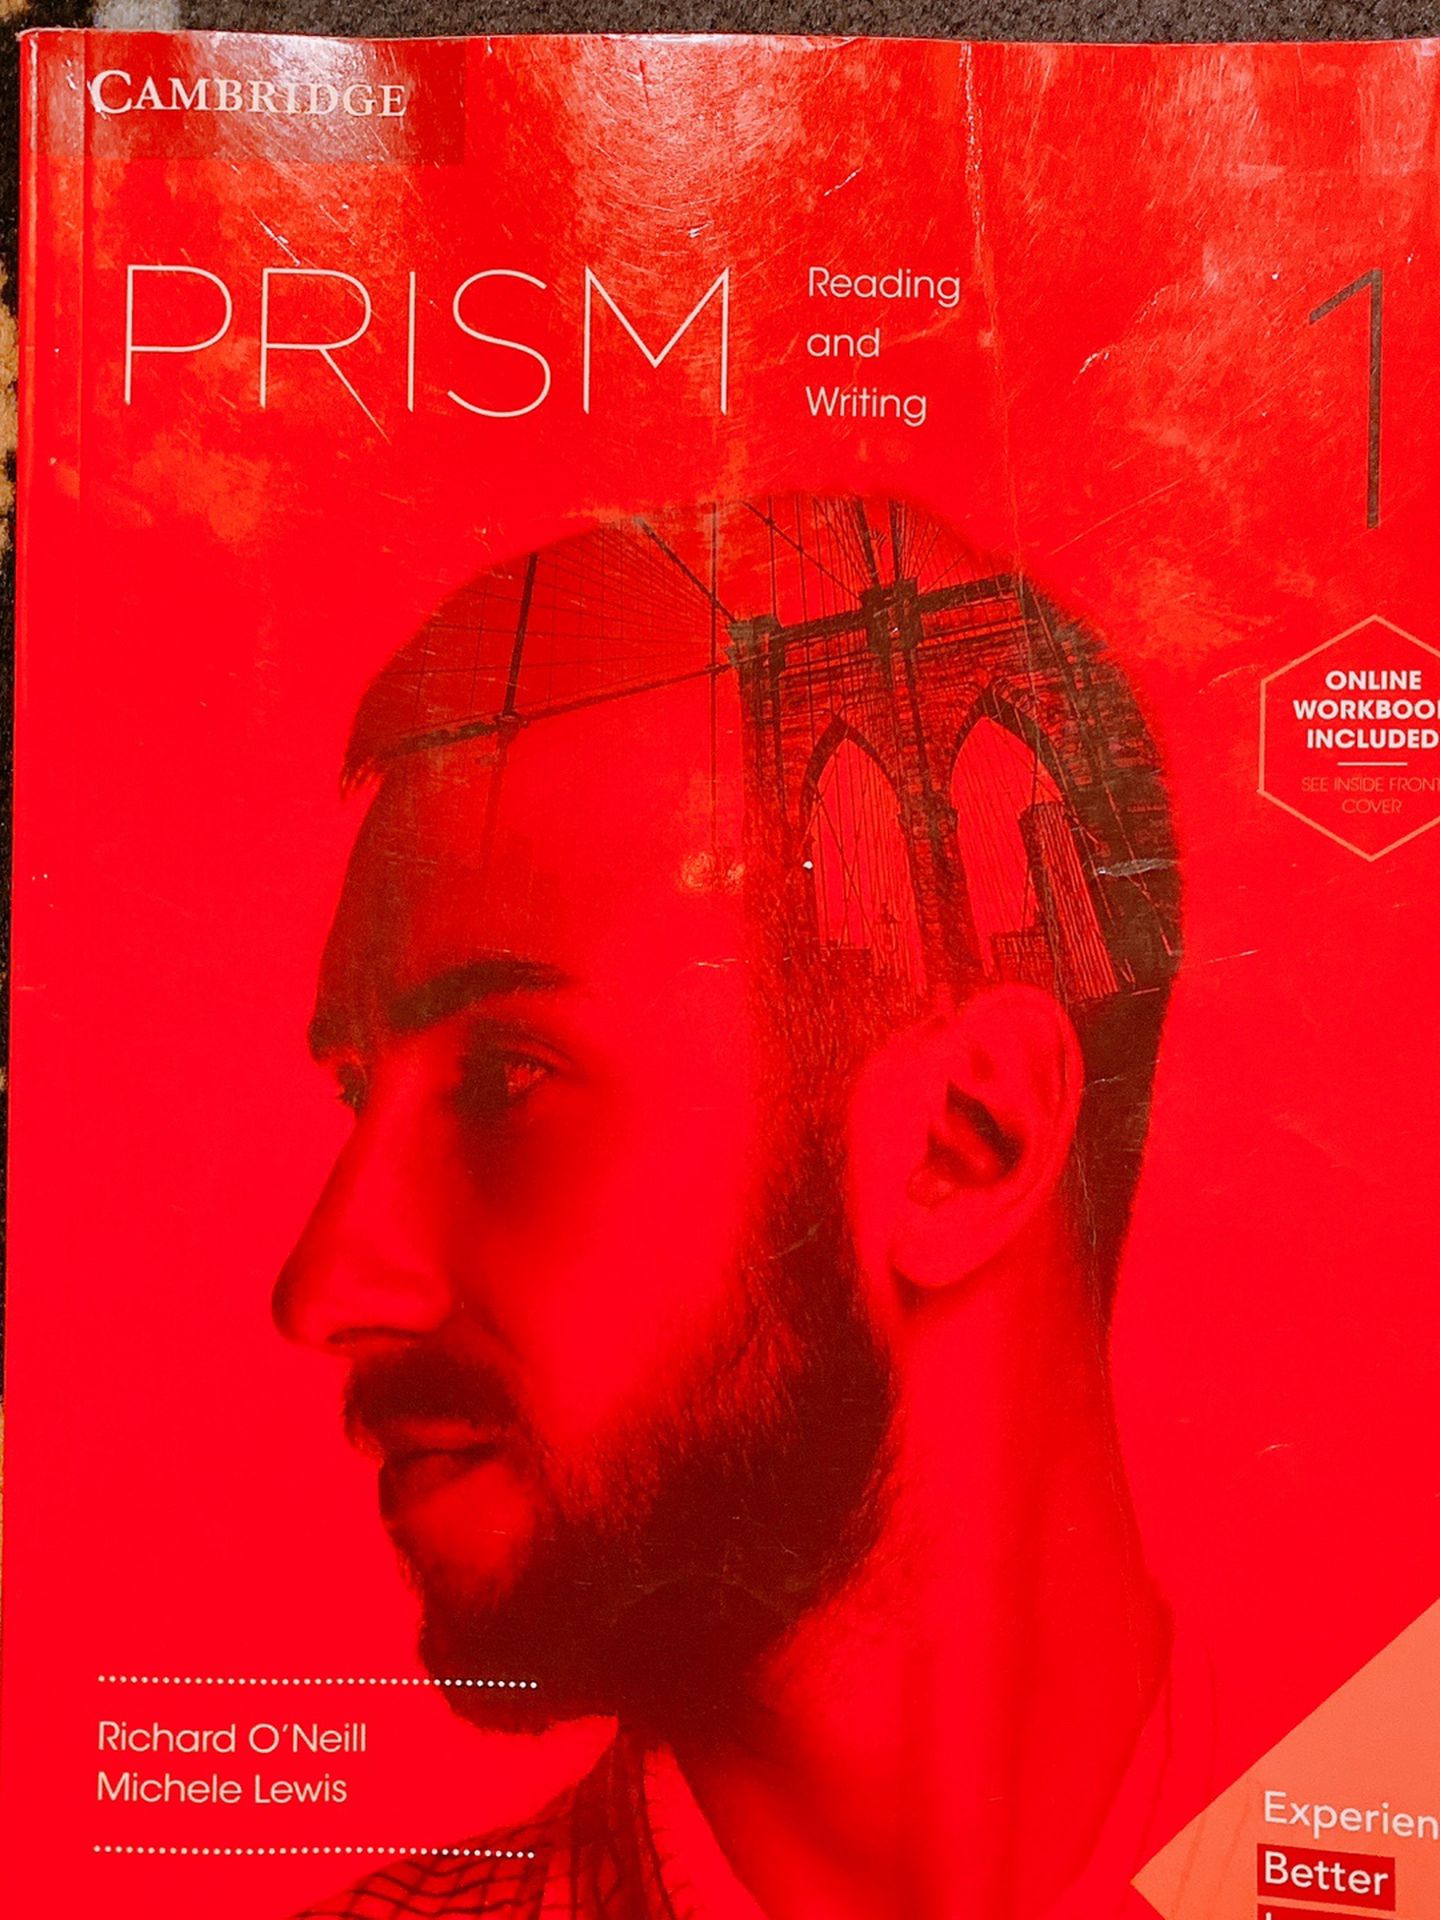 Prism 1 Reading and Writing